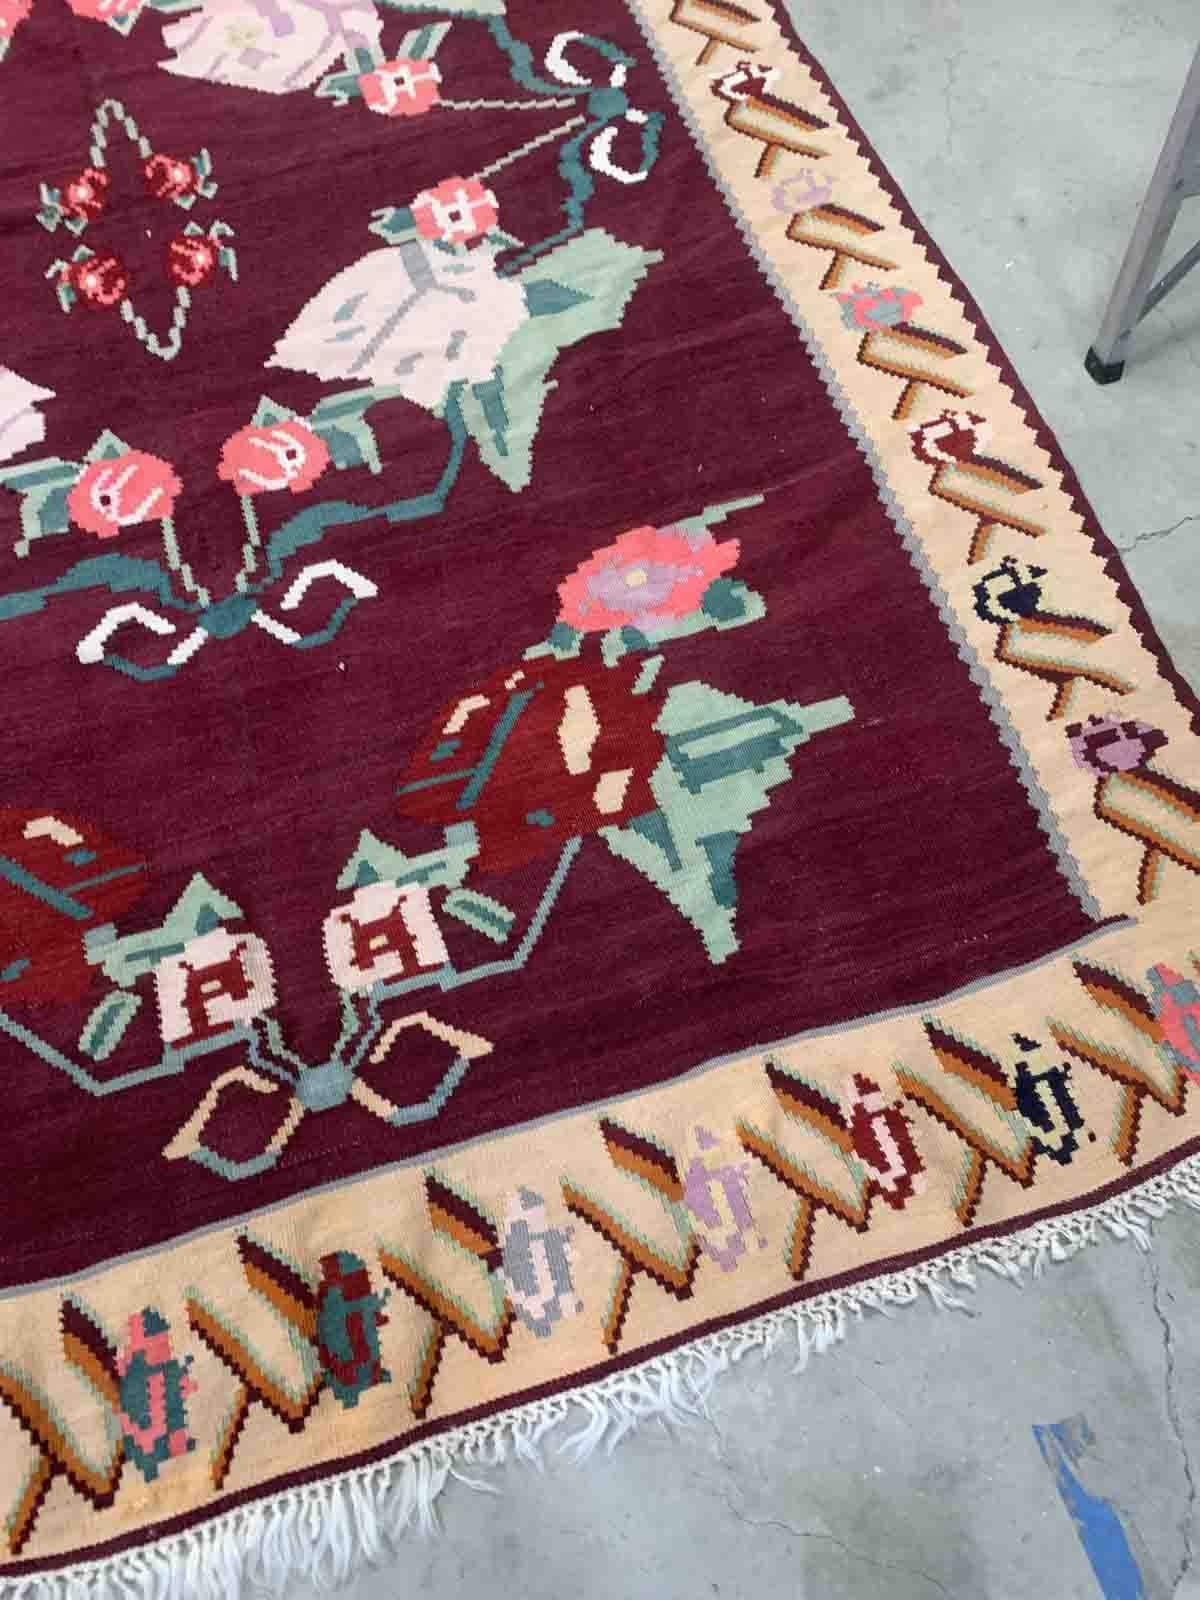 Handmade vintage Bessarabian kilim from Romania and burgundy and beige shades. The rug is from the middle of 20th century in original good condition.

-Condition: original good,

-Circa: 1960s,

-Size: 6.8' x 10' (207cm x 304cm),

-Material: